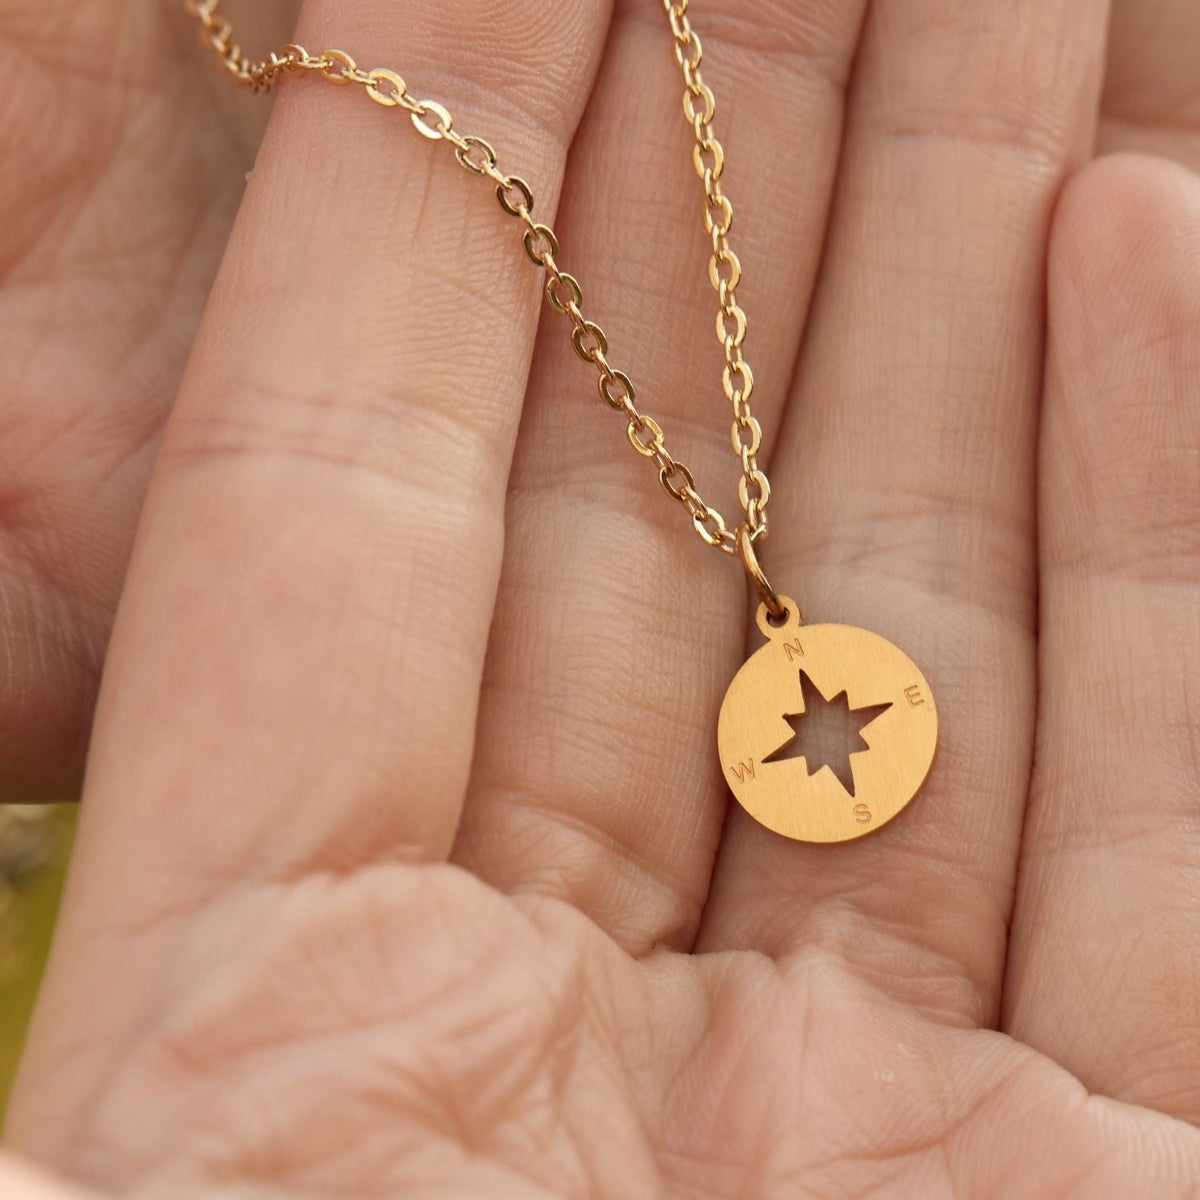 Will You Be My Godmother? | Guide Me, Love Me, Keep Me Safe | Compass Necklace